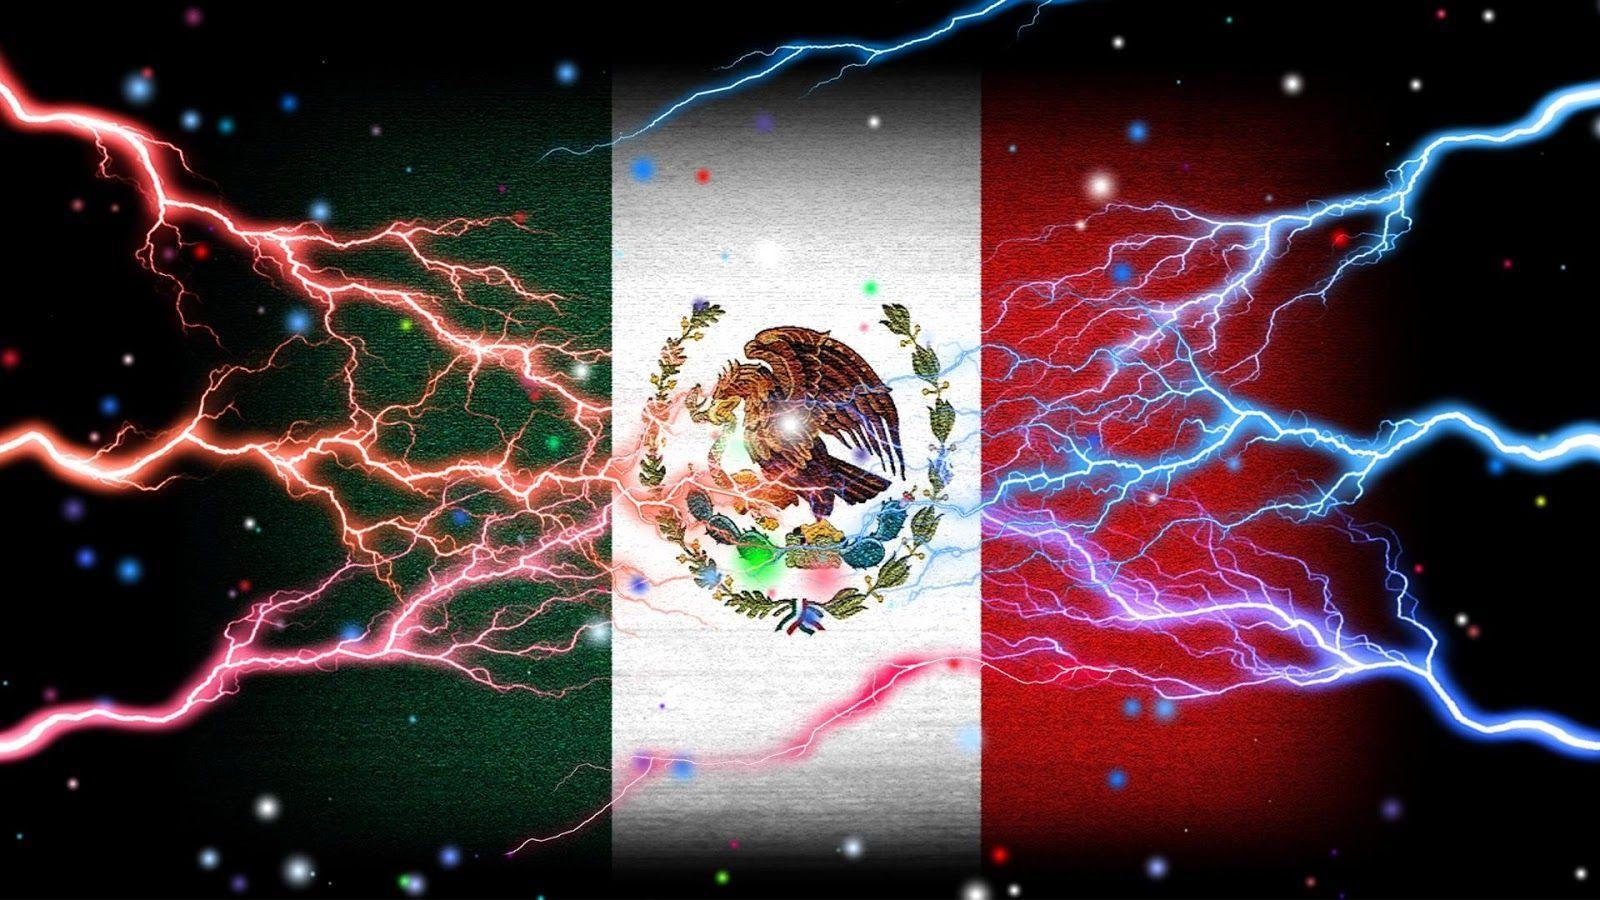 MEXICAN 1080P 2K 4K 5K HD wallpapers free download  Wallpaper Flare